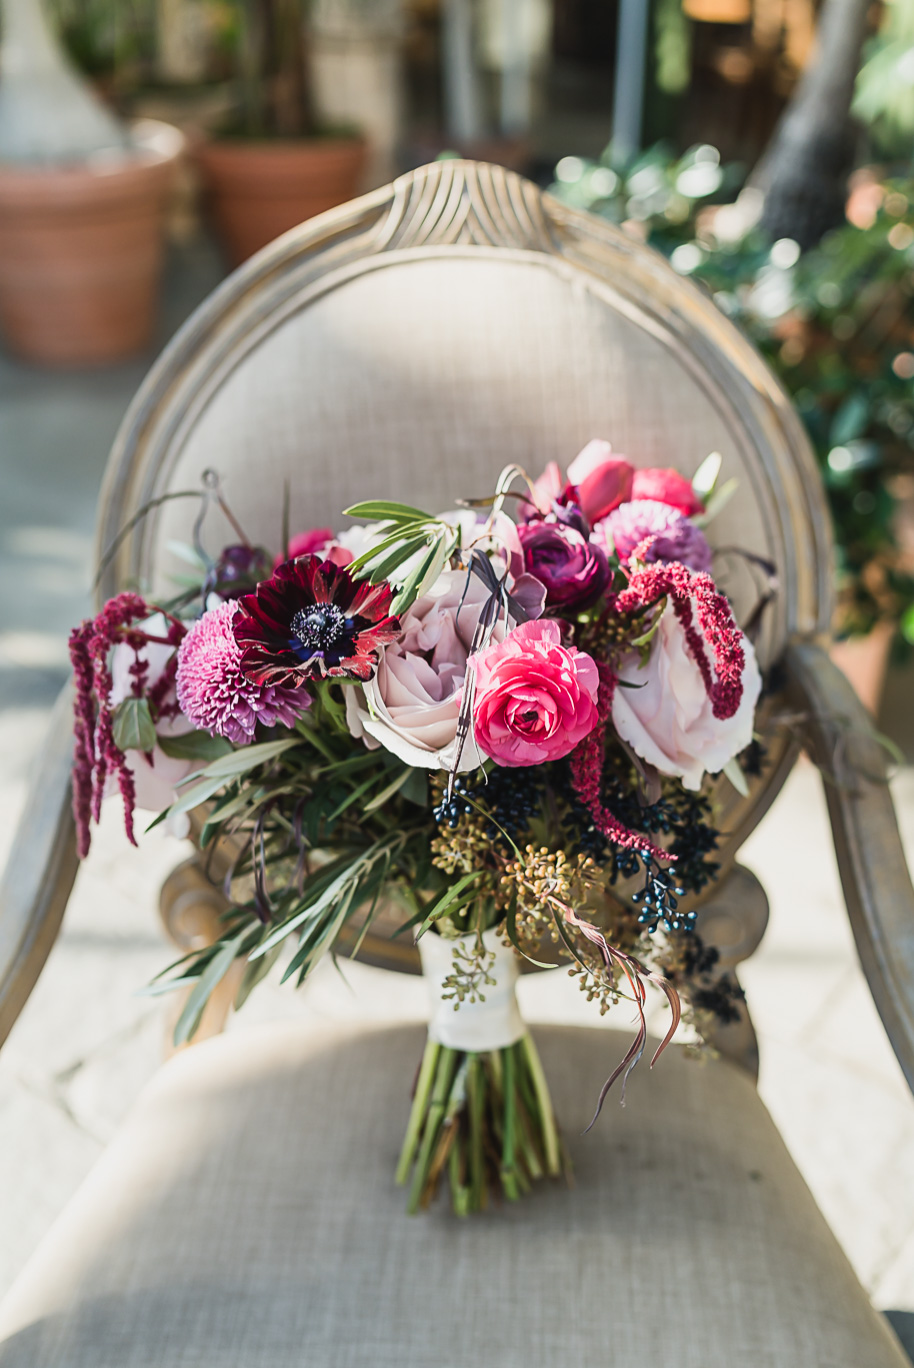 A winter Planterra garden wedding in Michigan by Kari Dawson, a Detroit wedding photographer for shy couples that want to look natural and their best.